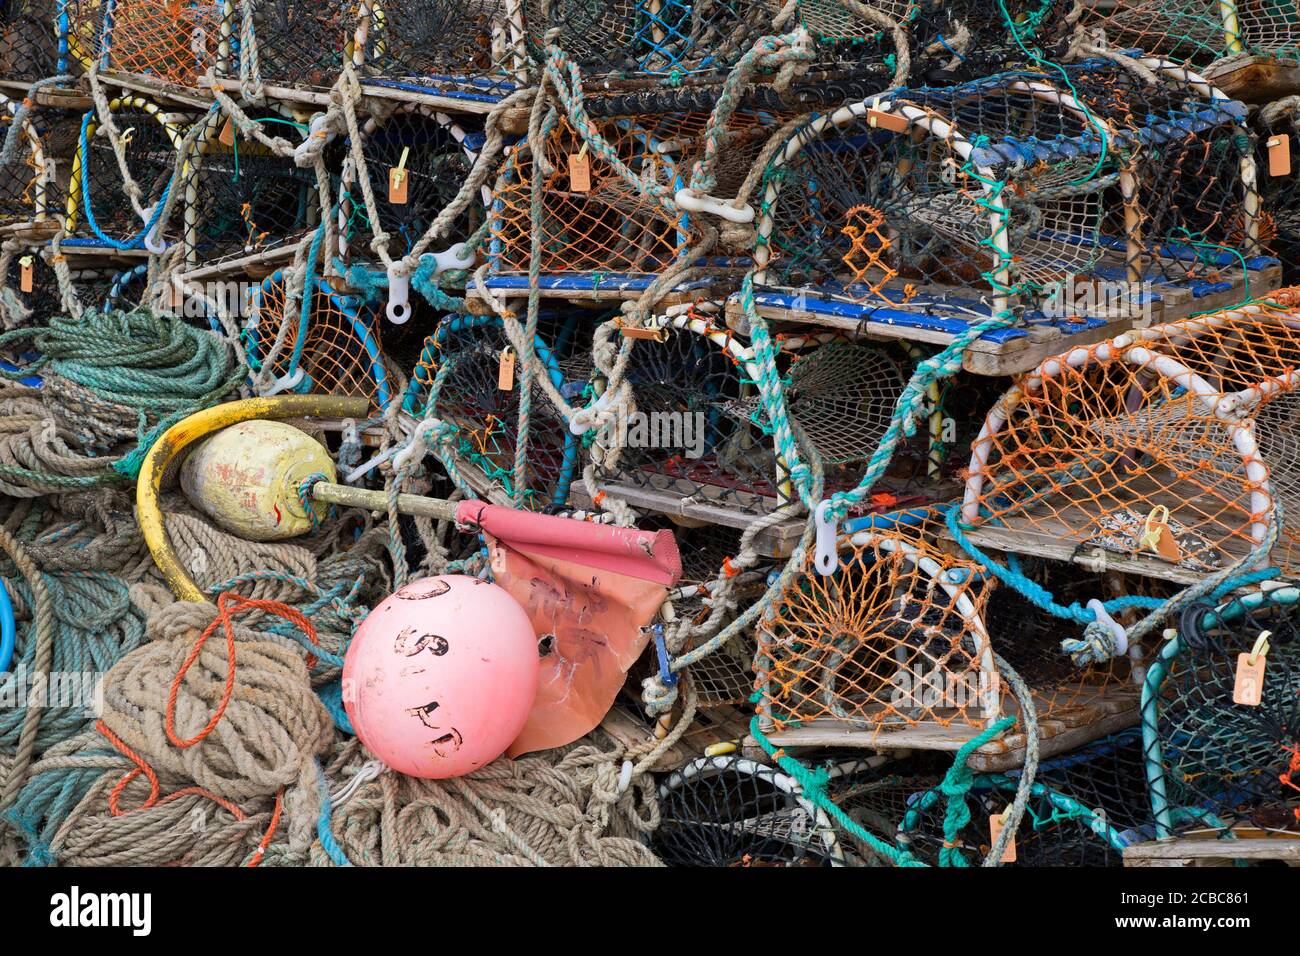 Lobster pots and fishing ropes in a pile, Beadnell, Northumberland, UK Stock Photo